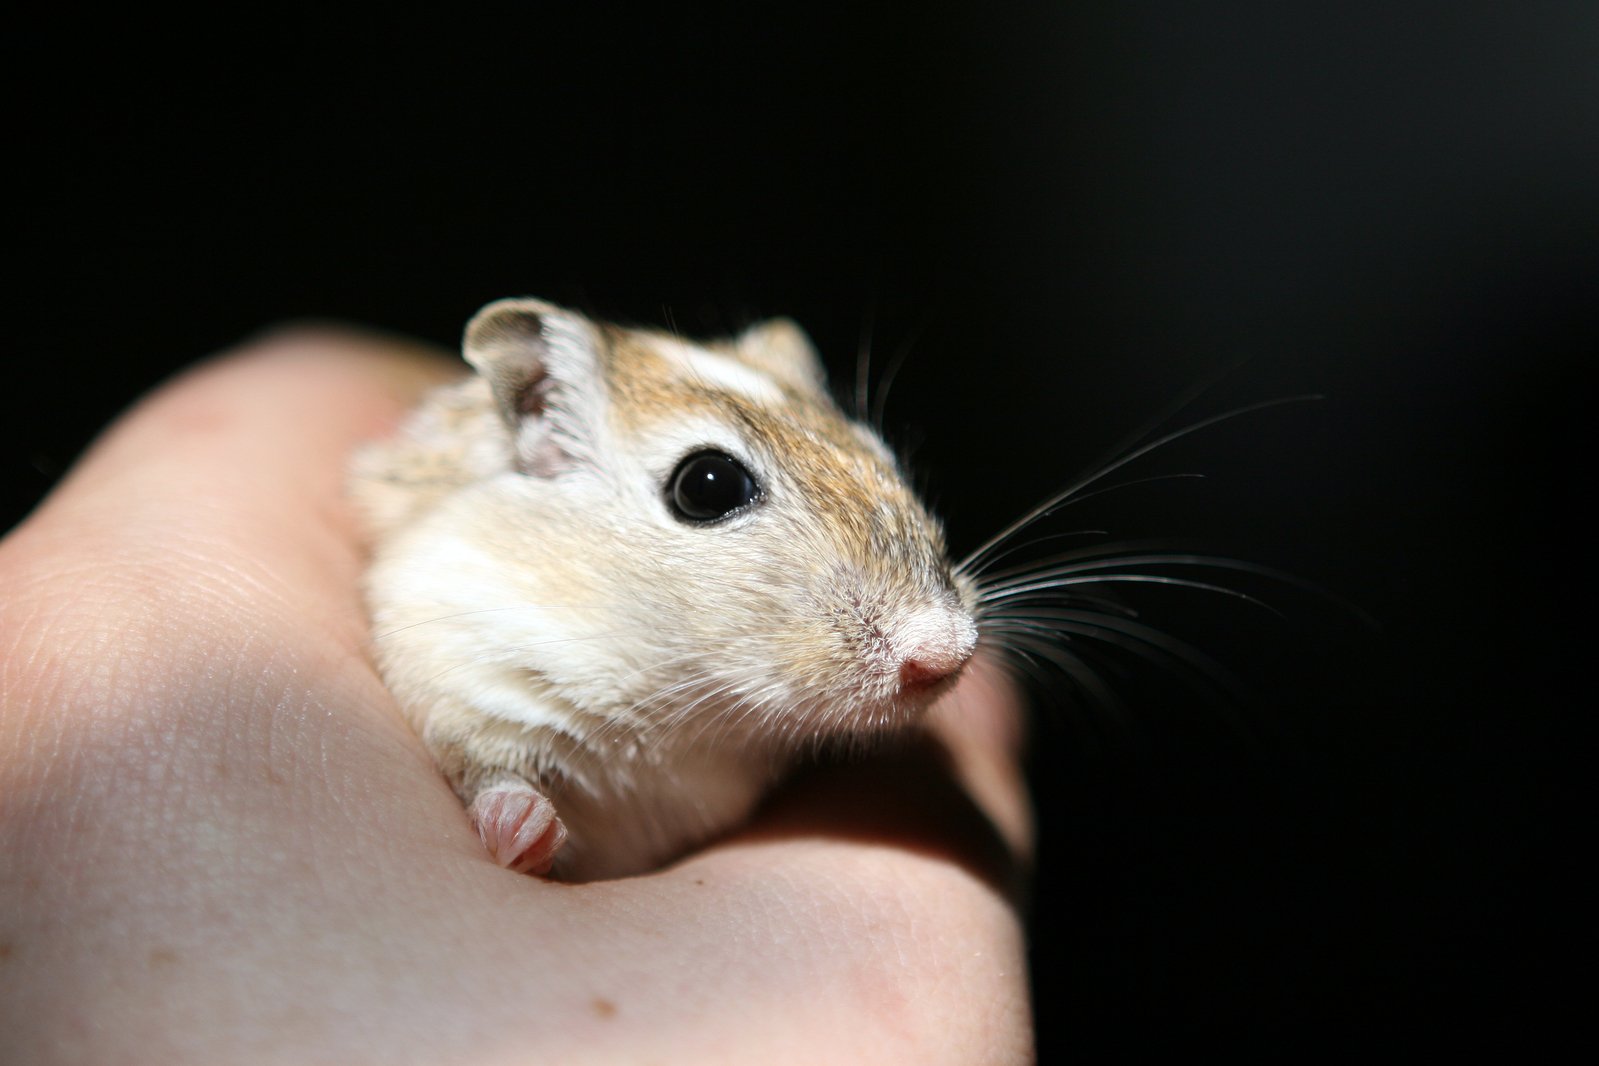 Cute adorable rodent